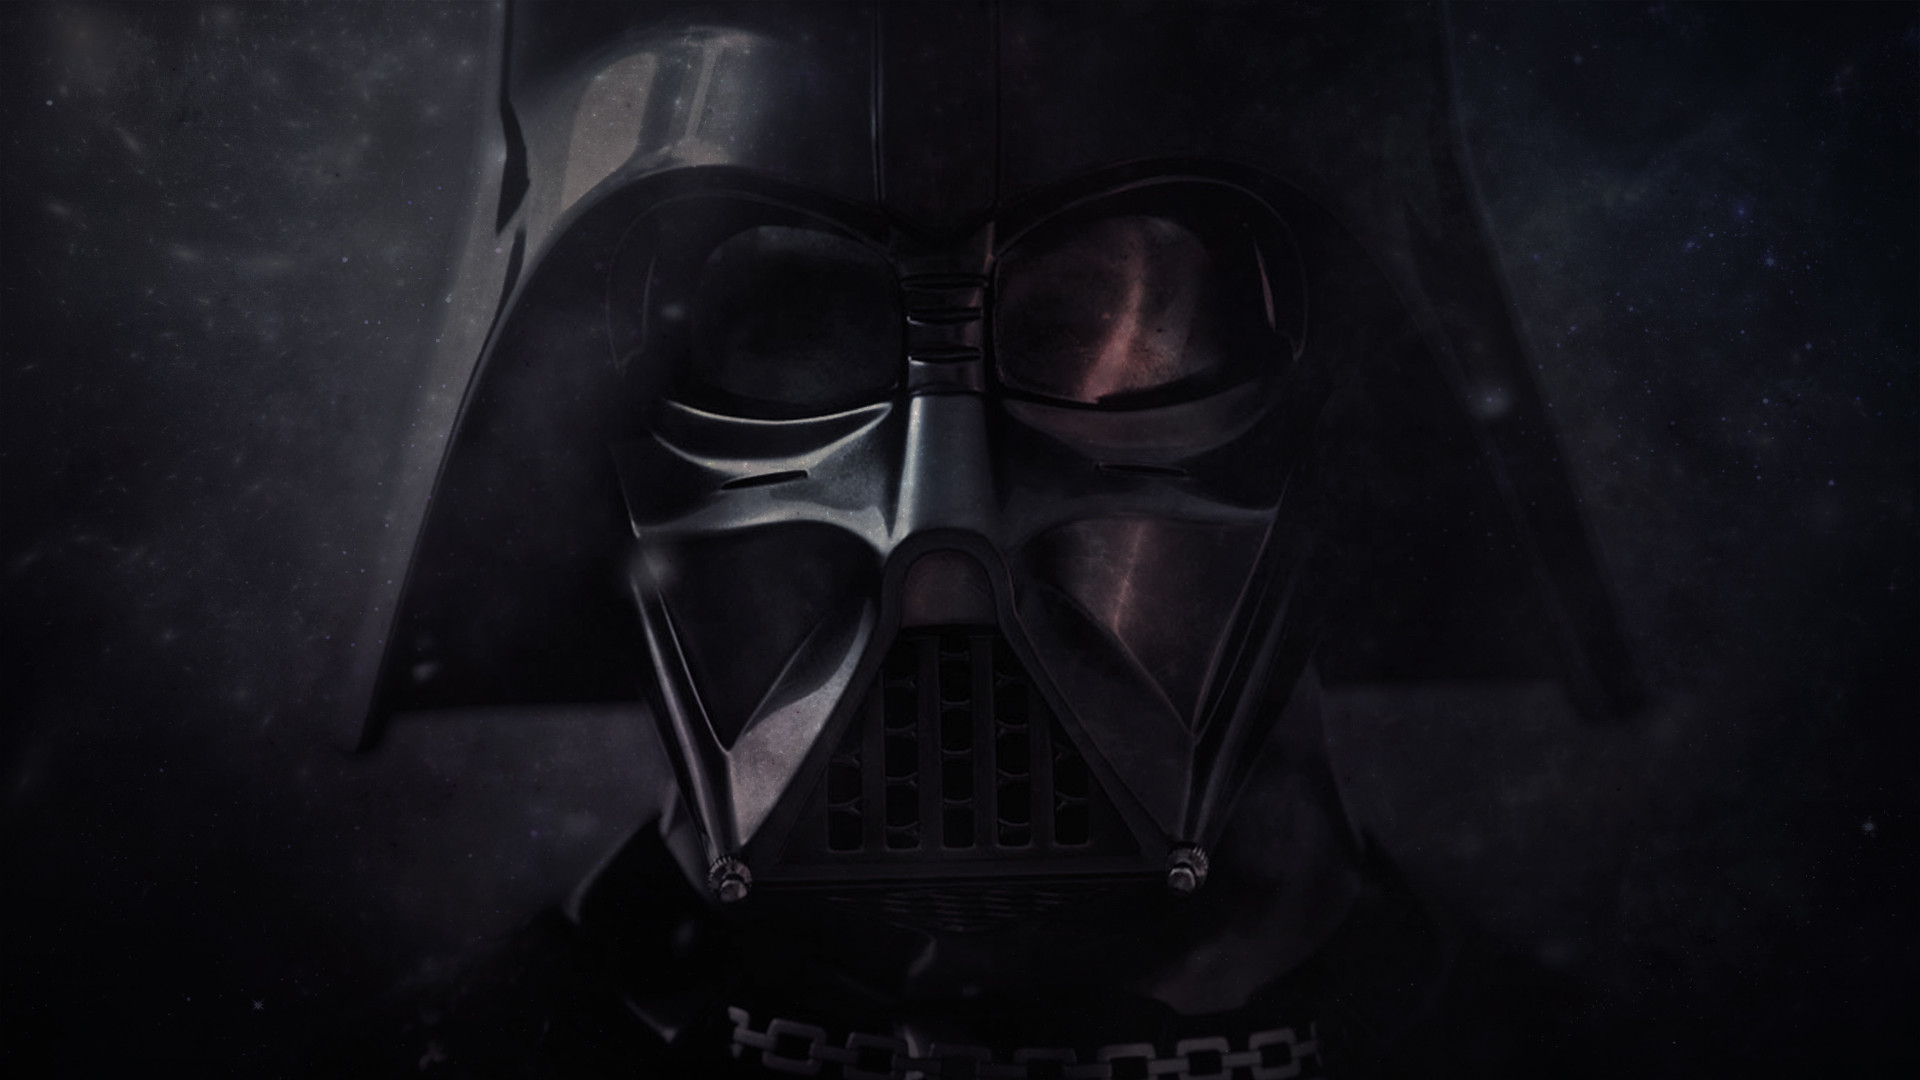 1920x1080 Darth Vader Live Wallpaper Android Apps on Google Play